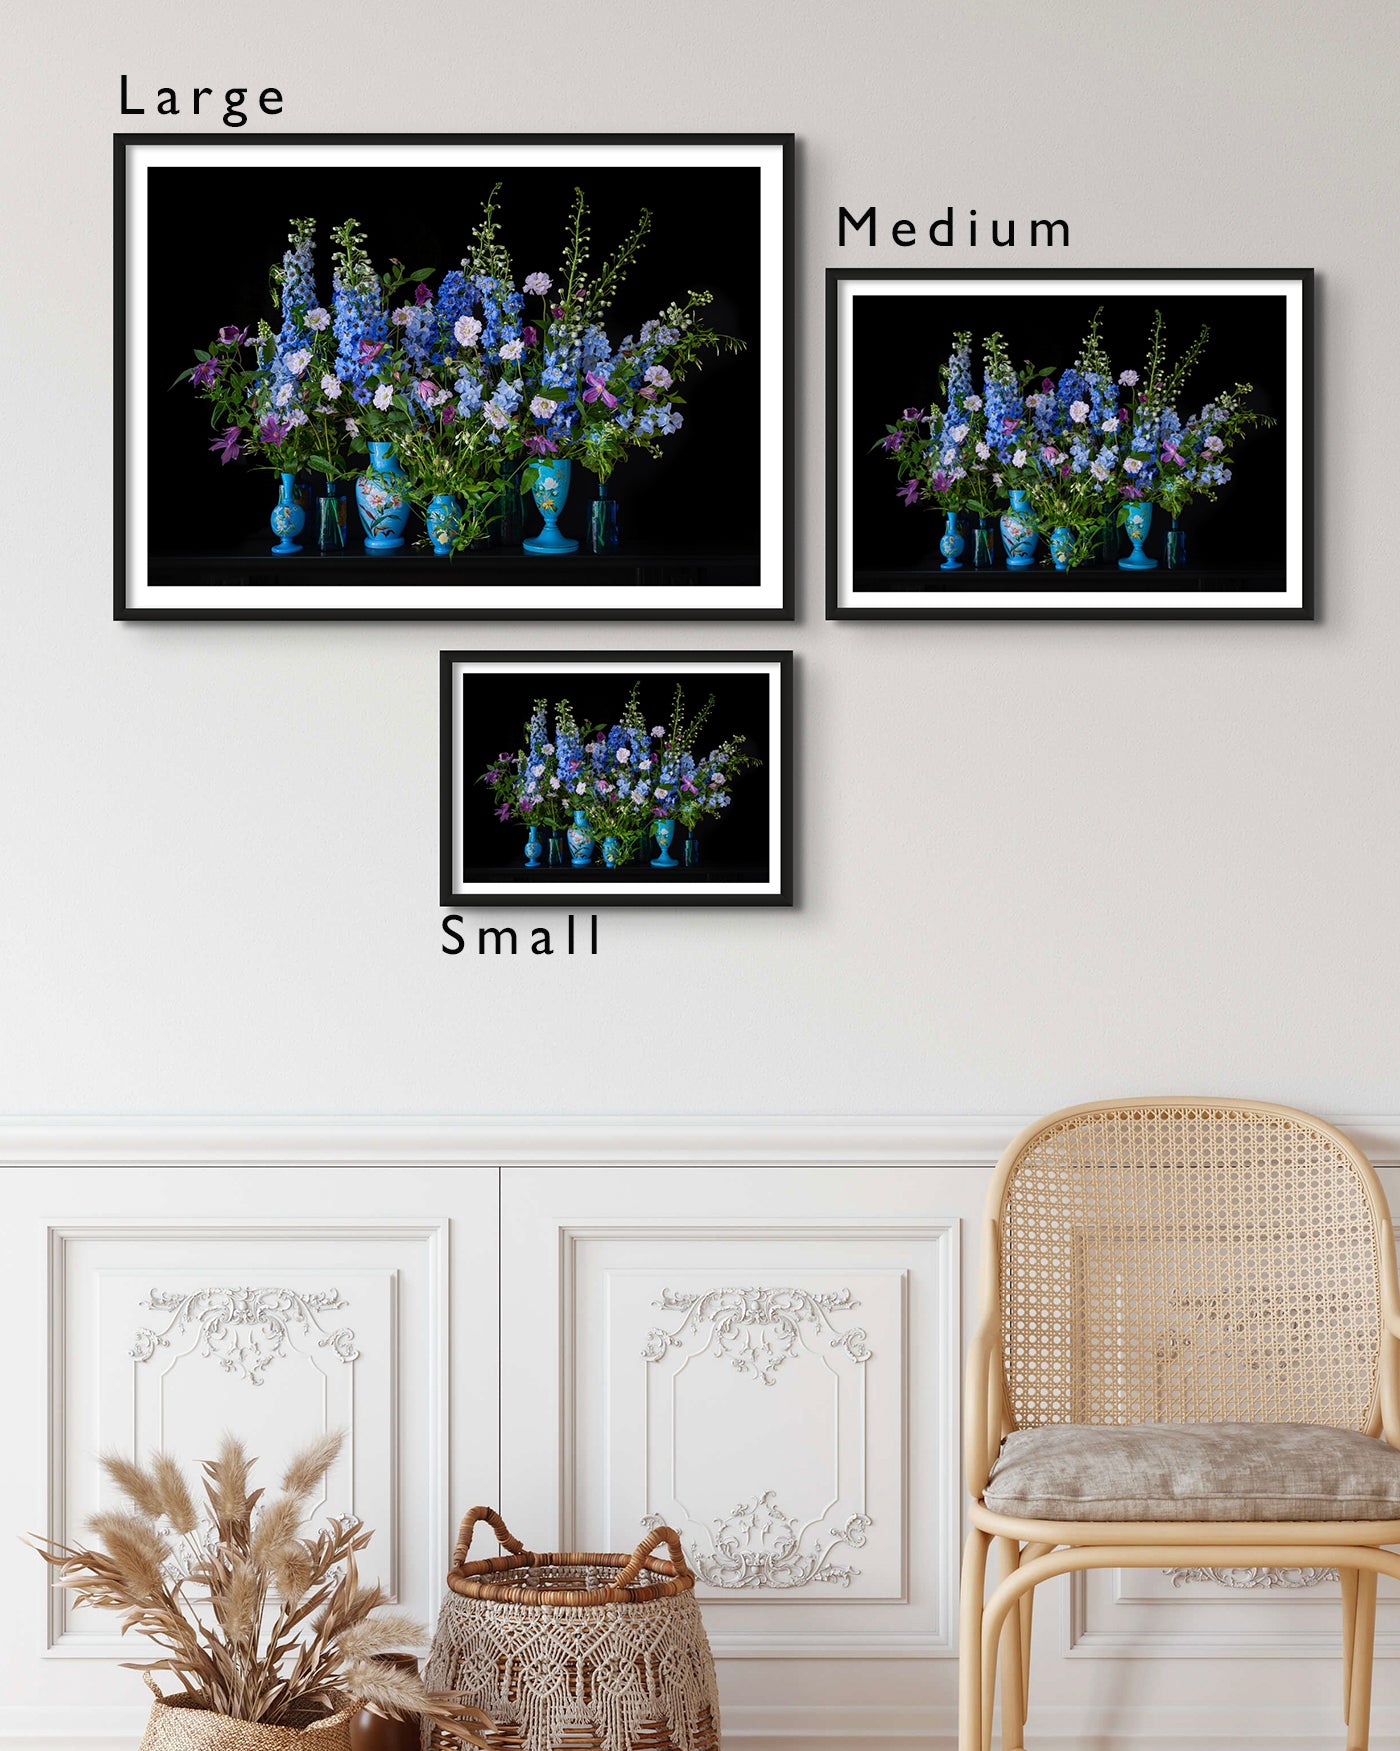 Print Size Guide - Interior picture of Small/Medium/Large 'Delphine' Limited Edition Fine Art Photographic Print Framed. Displayed on a white wall above a table in a Living Room.